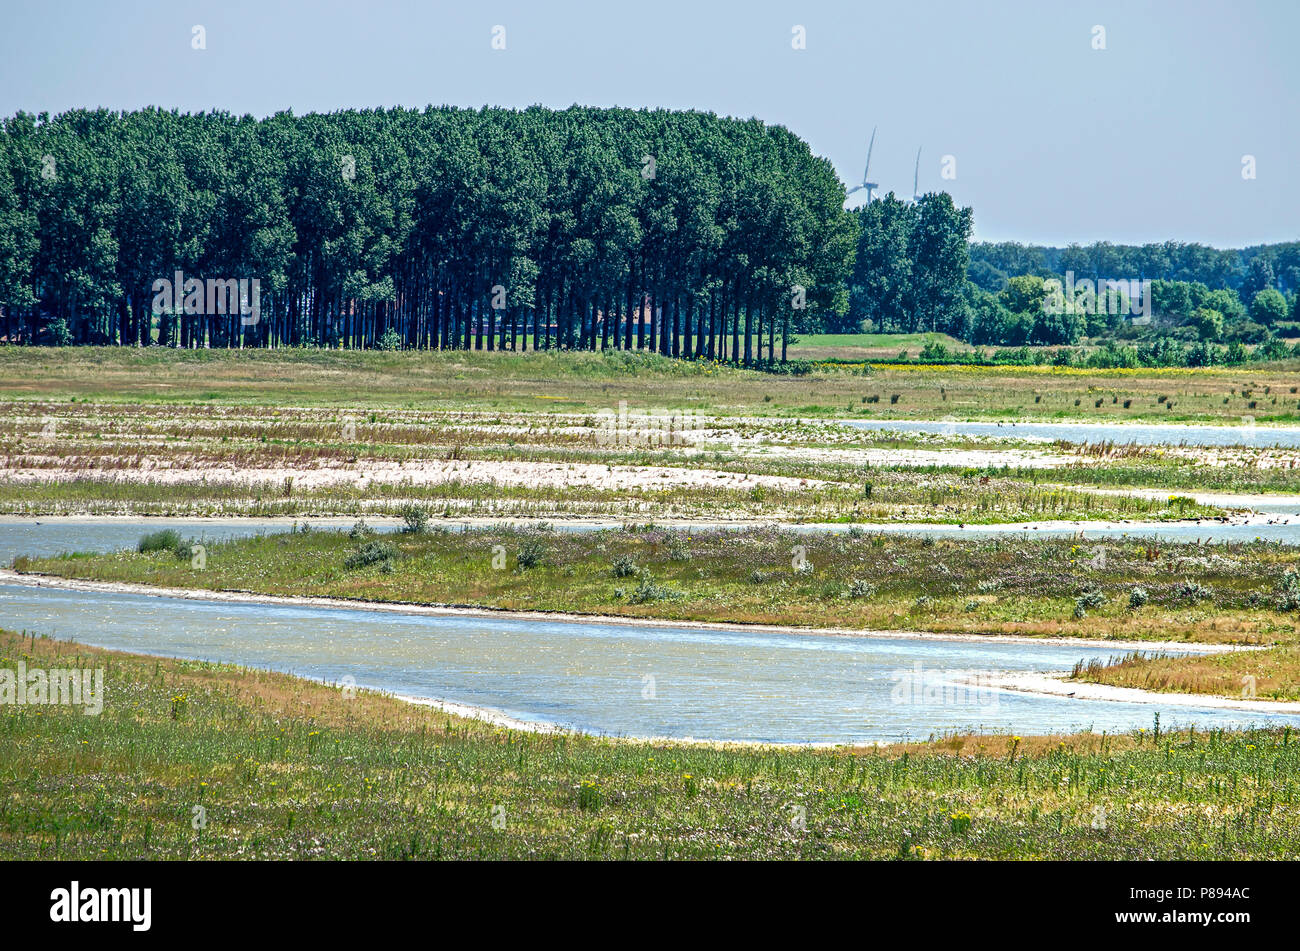 Municipality of Sluis, the Netherlands, July 2, 2018: new tidal nature created at Waterdunen project, with groups of trees and other old landscape ele Stock Photo